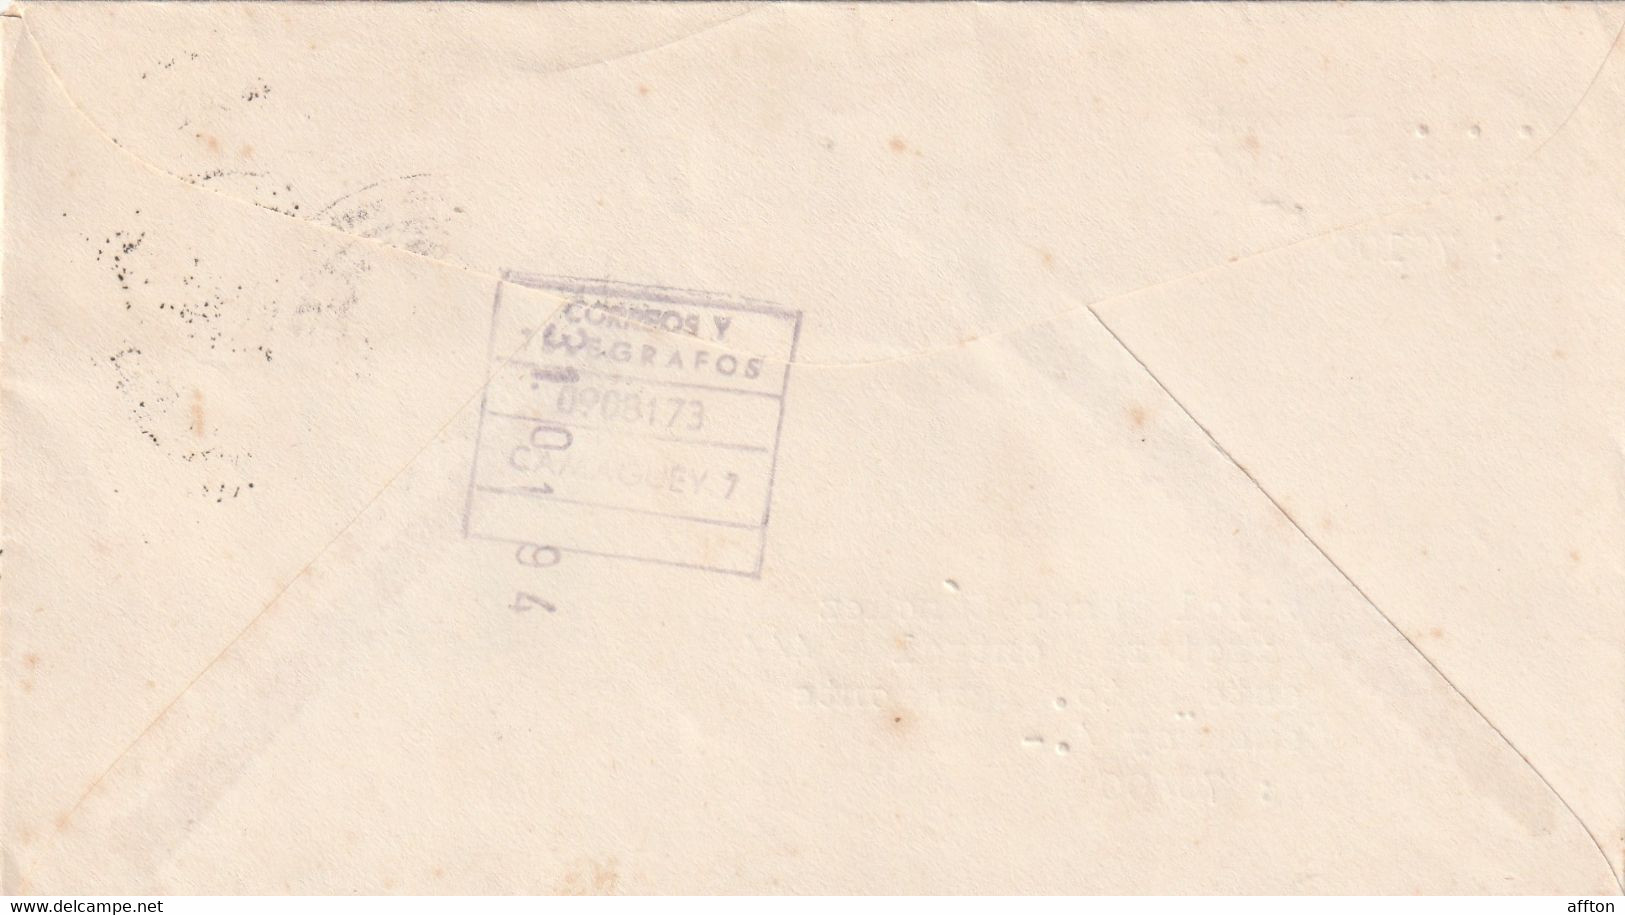 Camaguey Cuba 1994 Cover Mailed - Covers & Documents